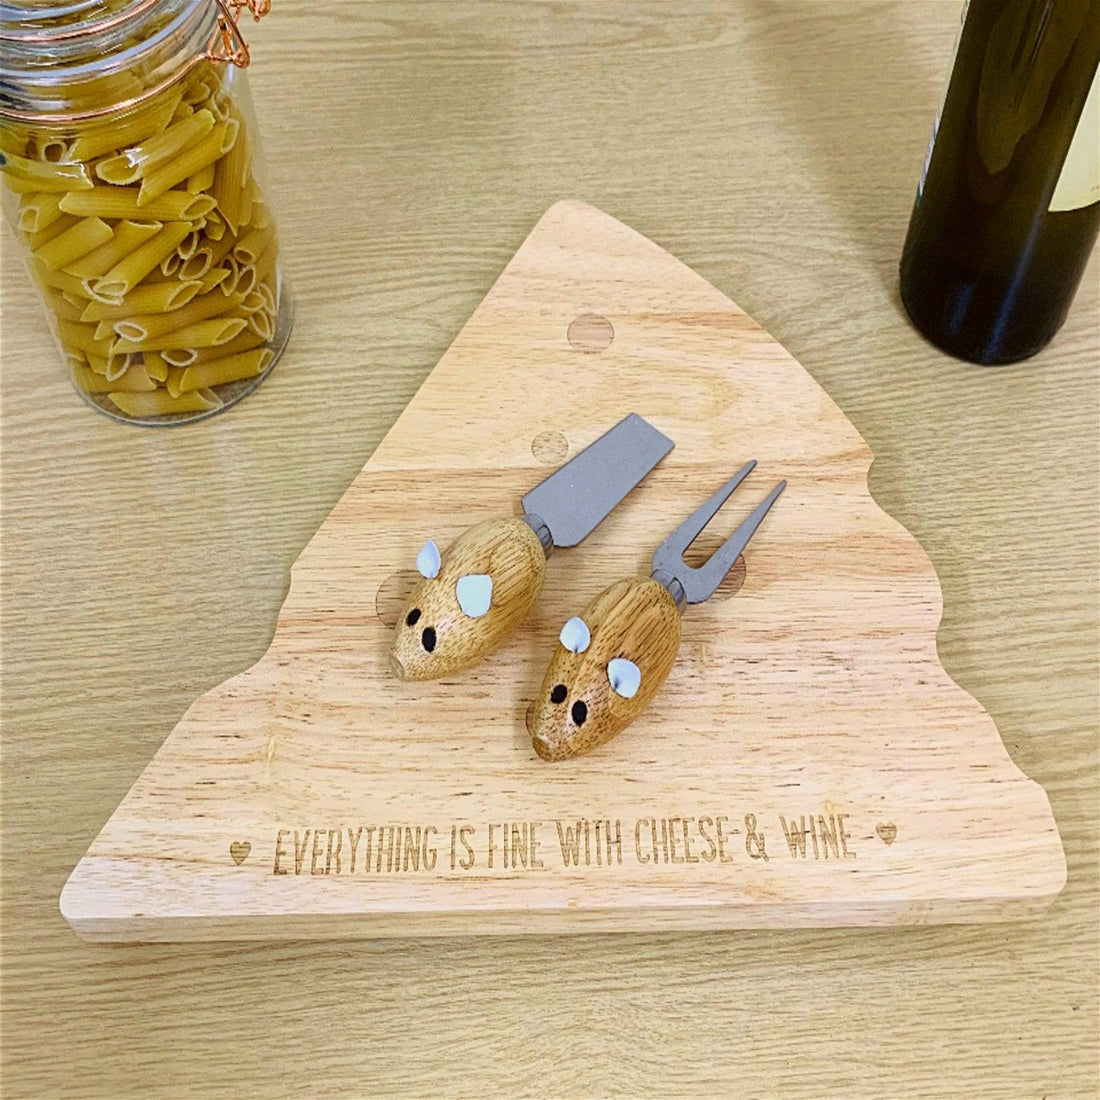 Cheeseboard Wedge Shape with Mouse Knives - £41.99 - Kitchen Storage 